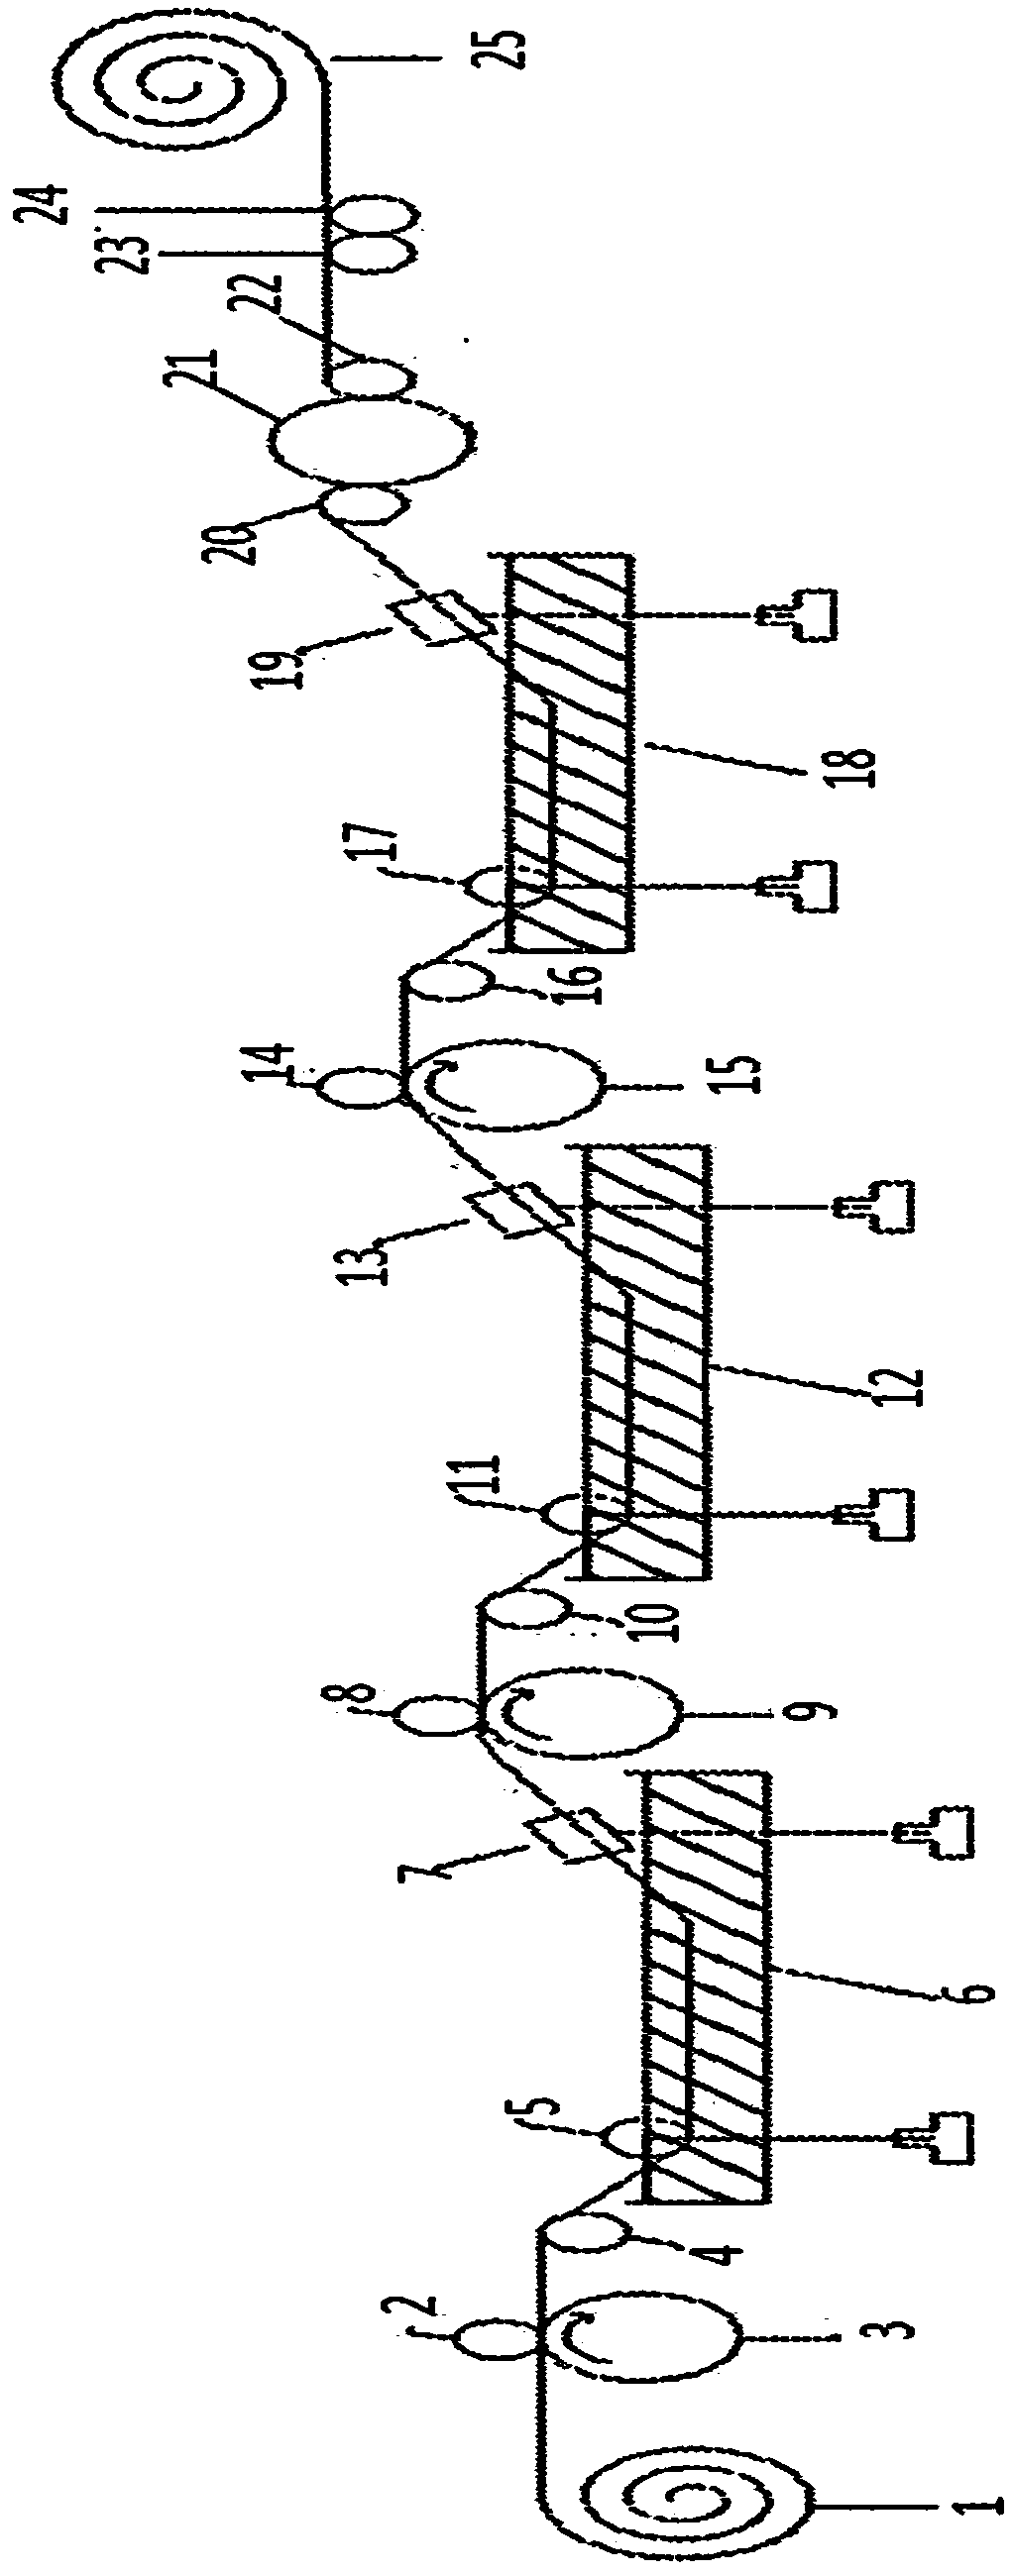 Glue-dipping apparatus for honeycomb-shaped amphiphilic non-woven fabrics and process therefor